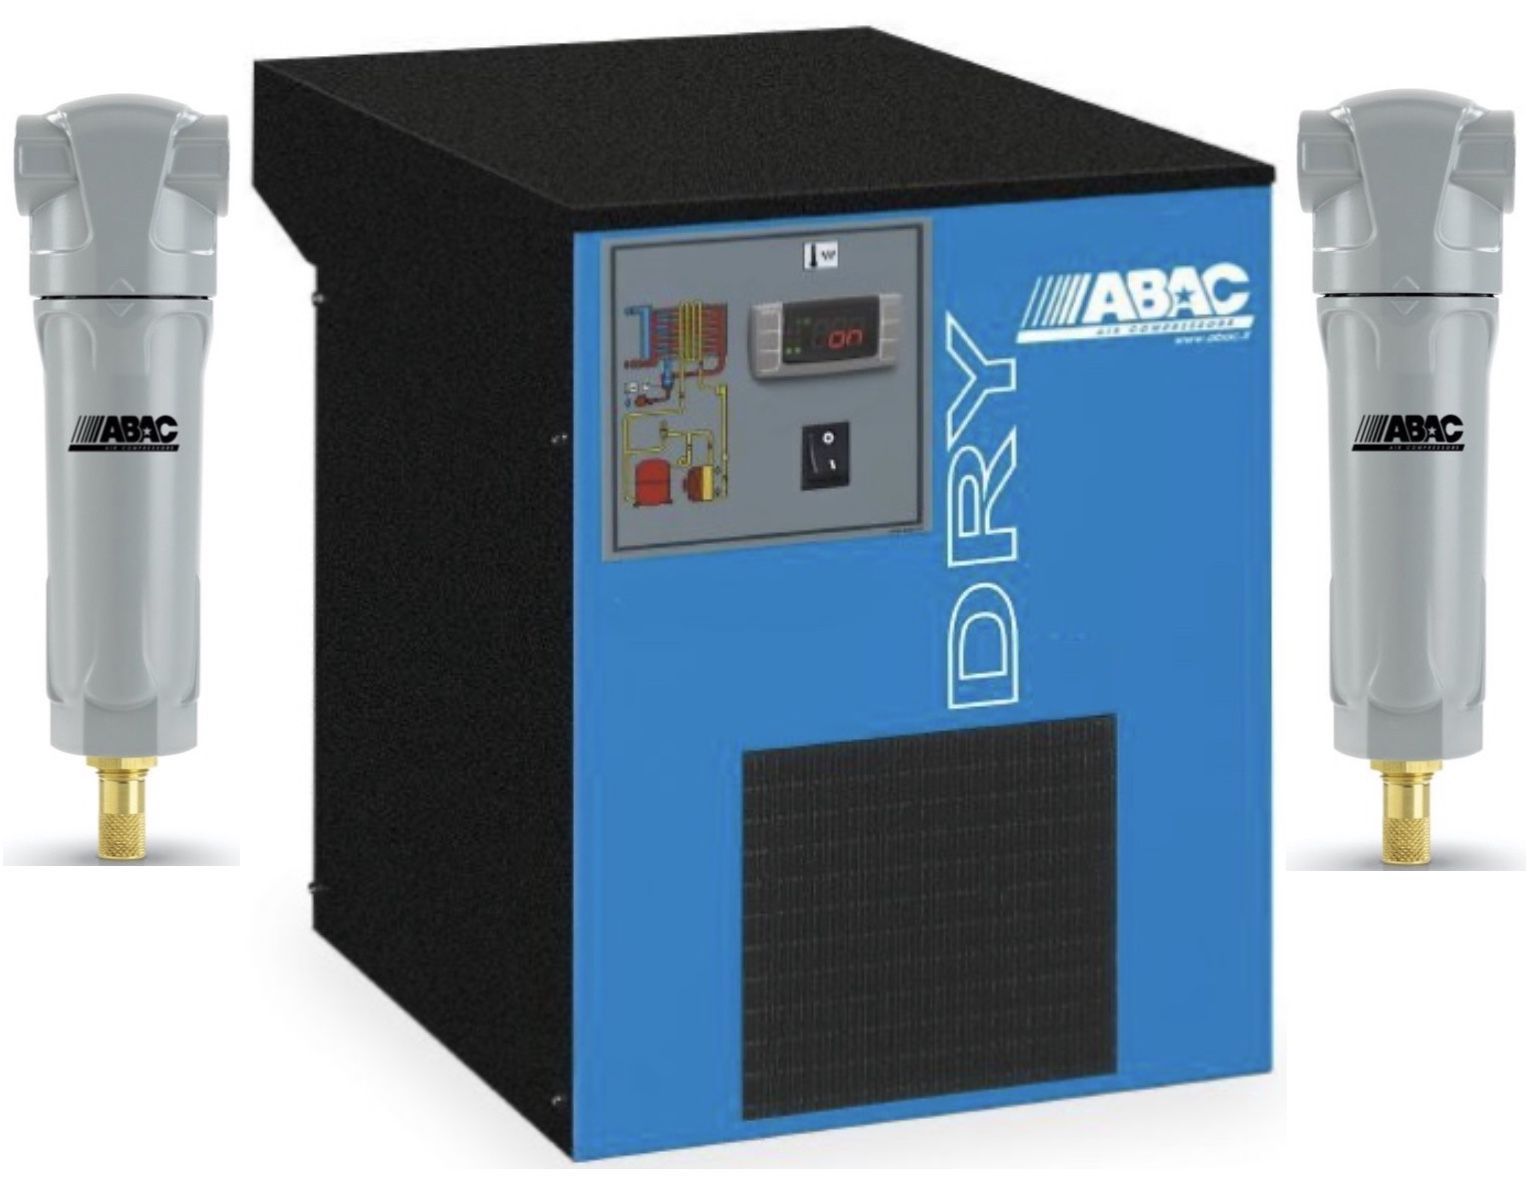 Abac Dry 25 + 2 X Filters 16 Cfm Refrigerated Dryer - 4102005870 Compressed Air